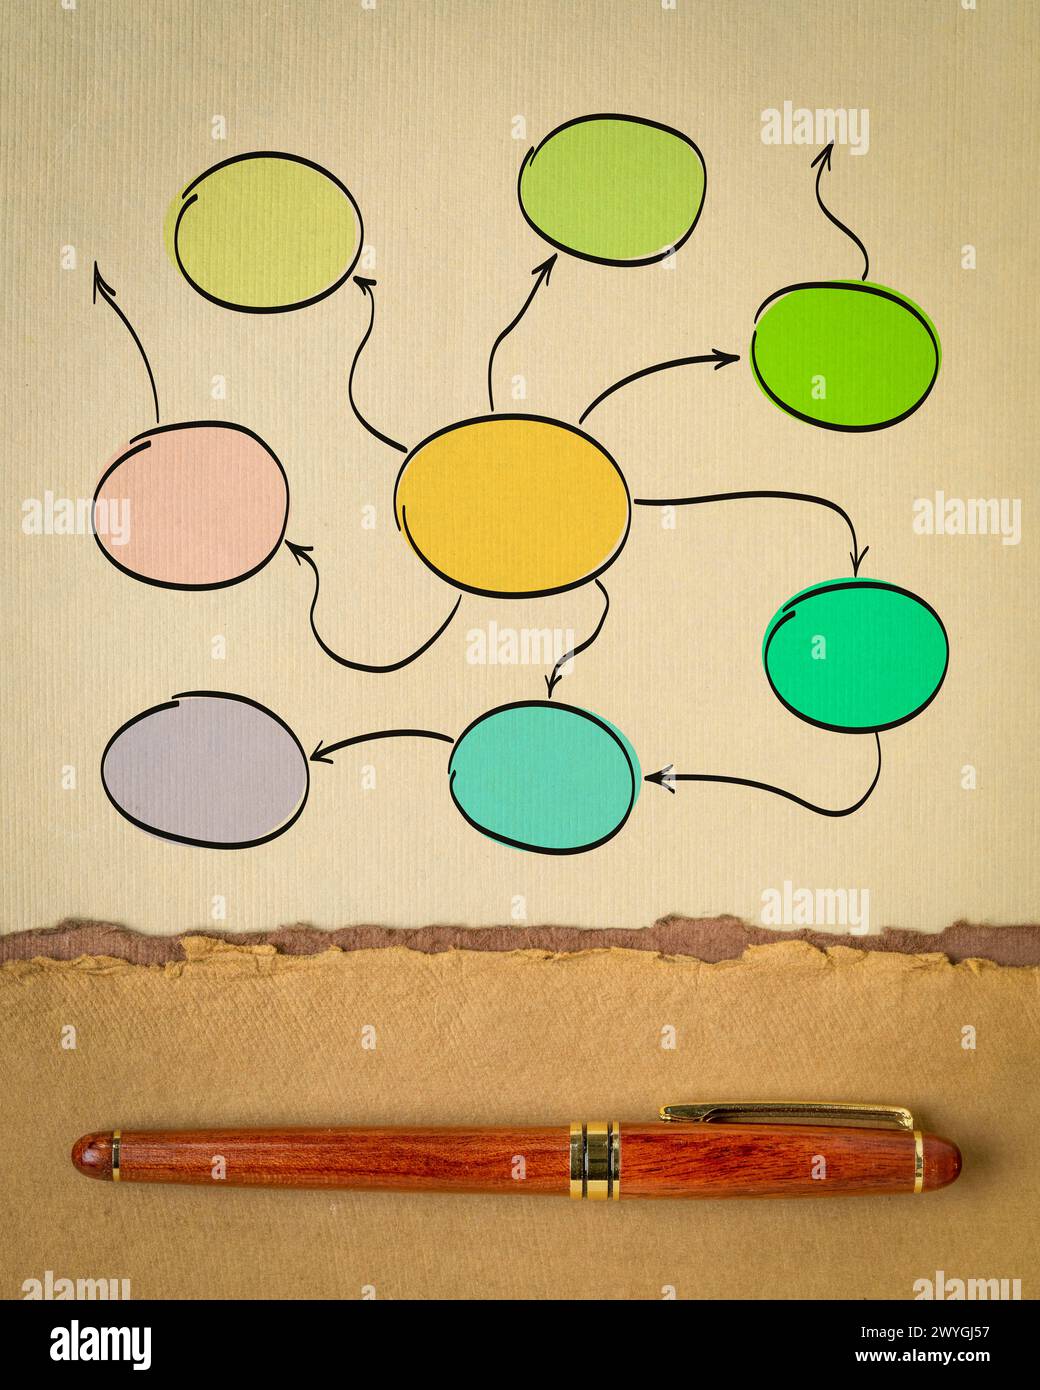 Hand drawn blank mind map, flowchart or network template, sketch on art paper Stock Photo